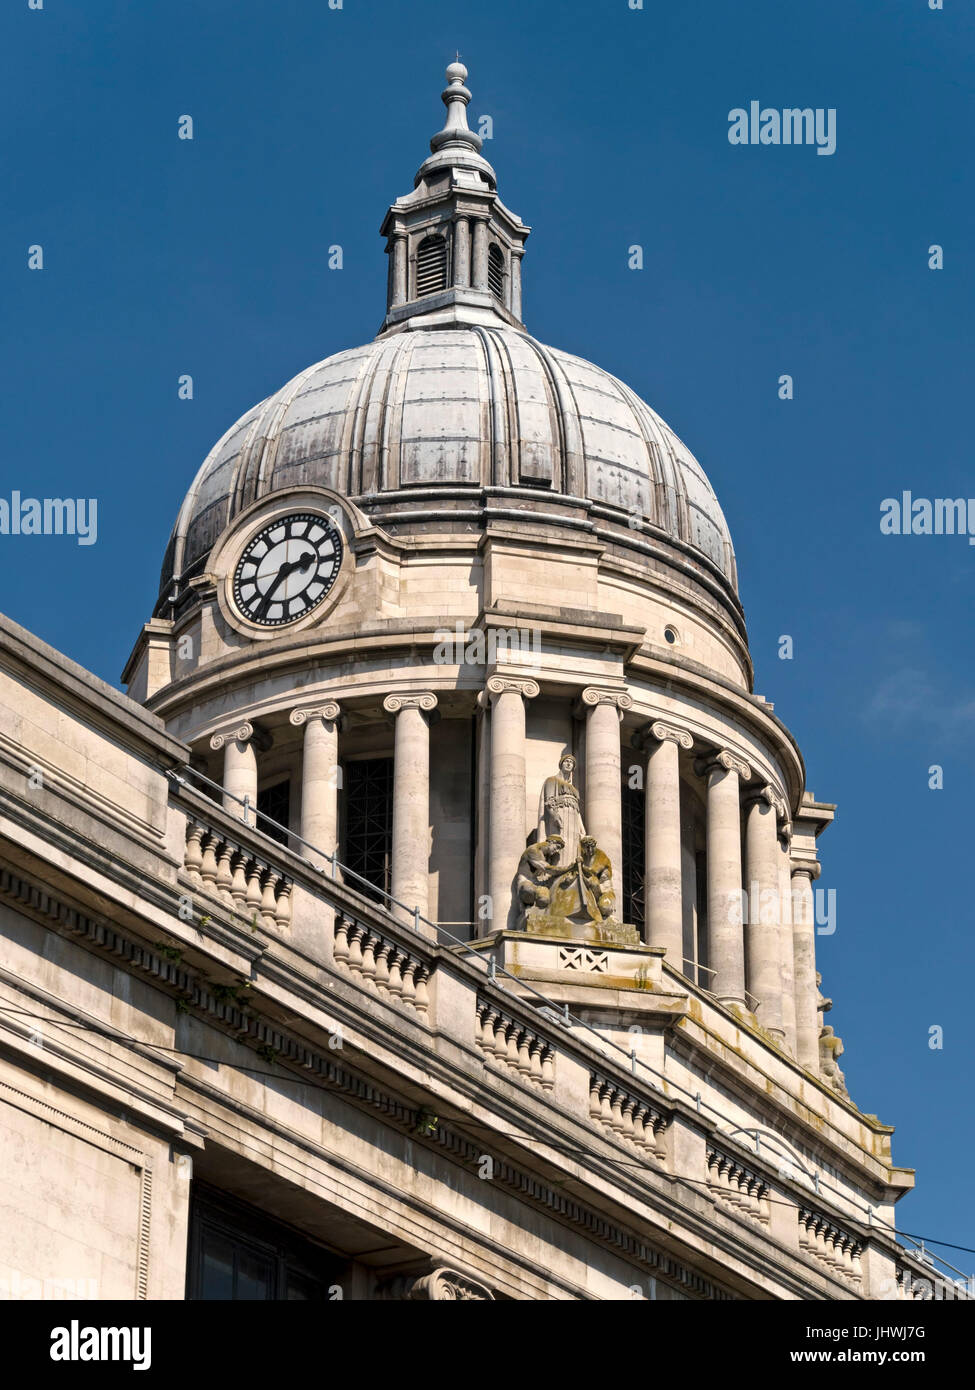 Ornate lead dome roof with ionic columns and cupola on roof of Nottingham Council House building, Nottingham, England, UK Stock Photo